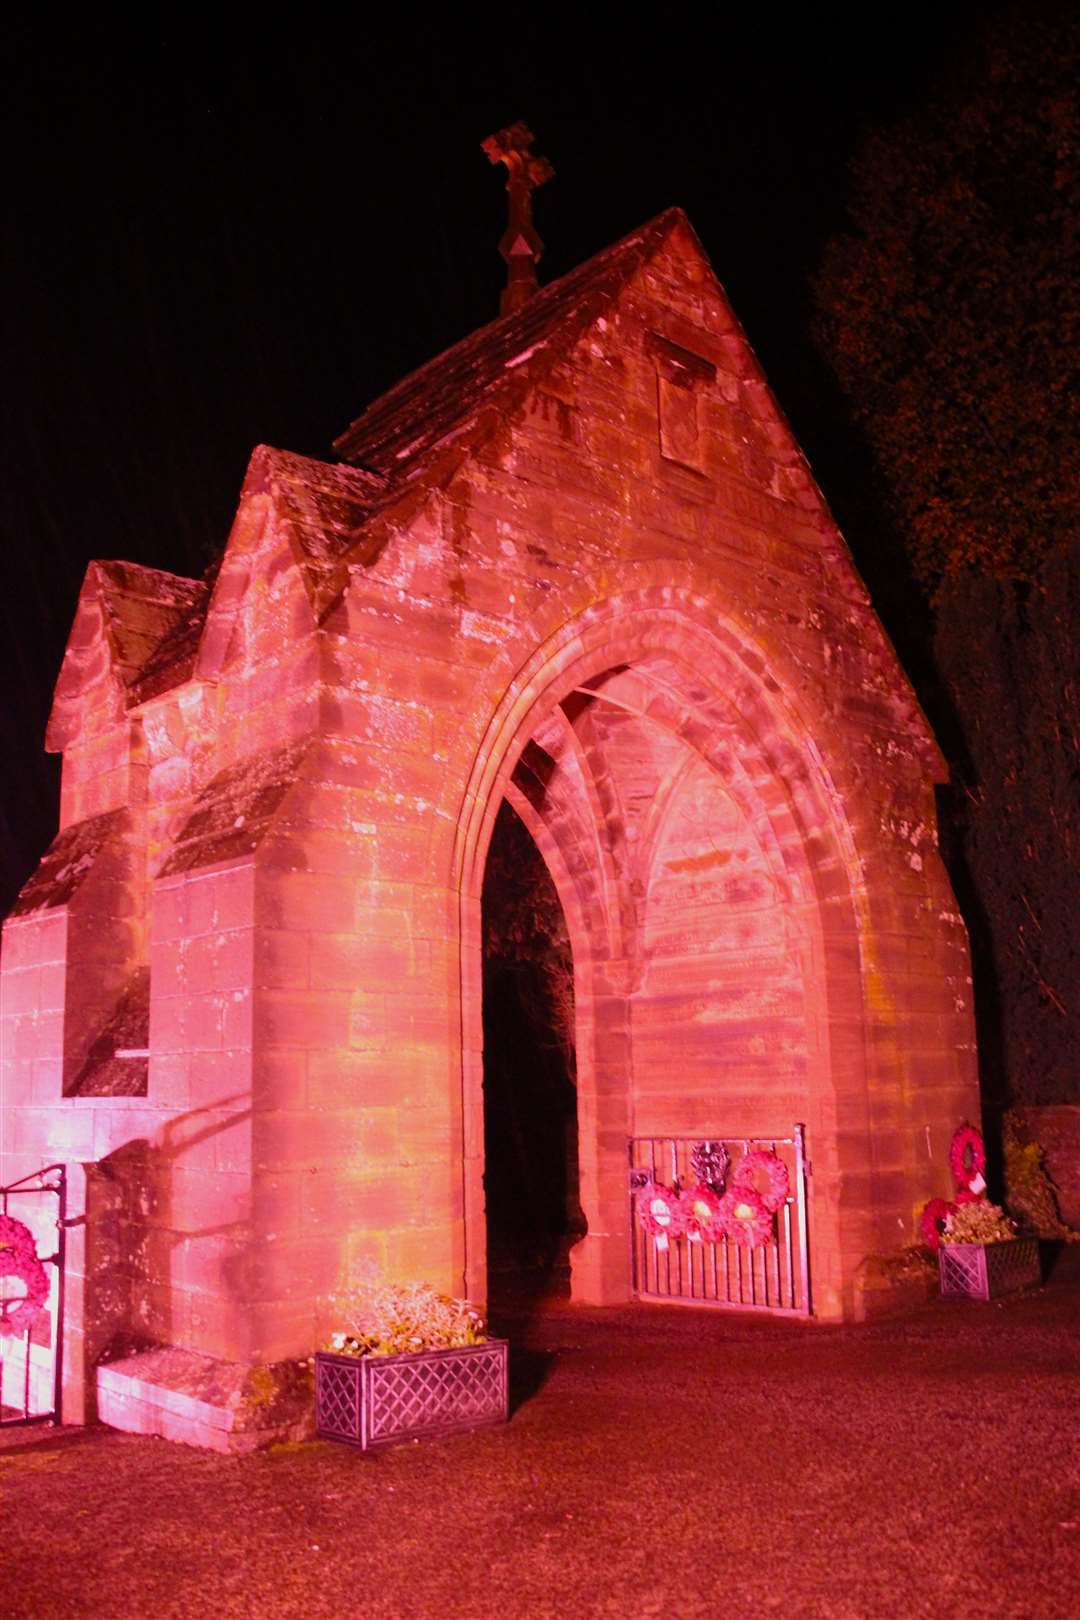 The town's Memorial Arch is lit up for the Poppy Scotland appeal.